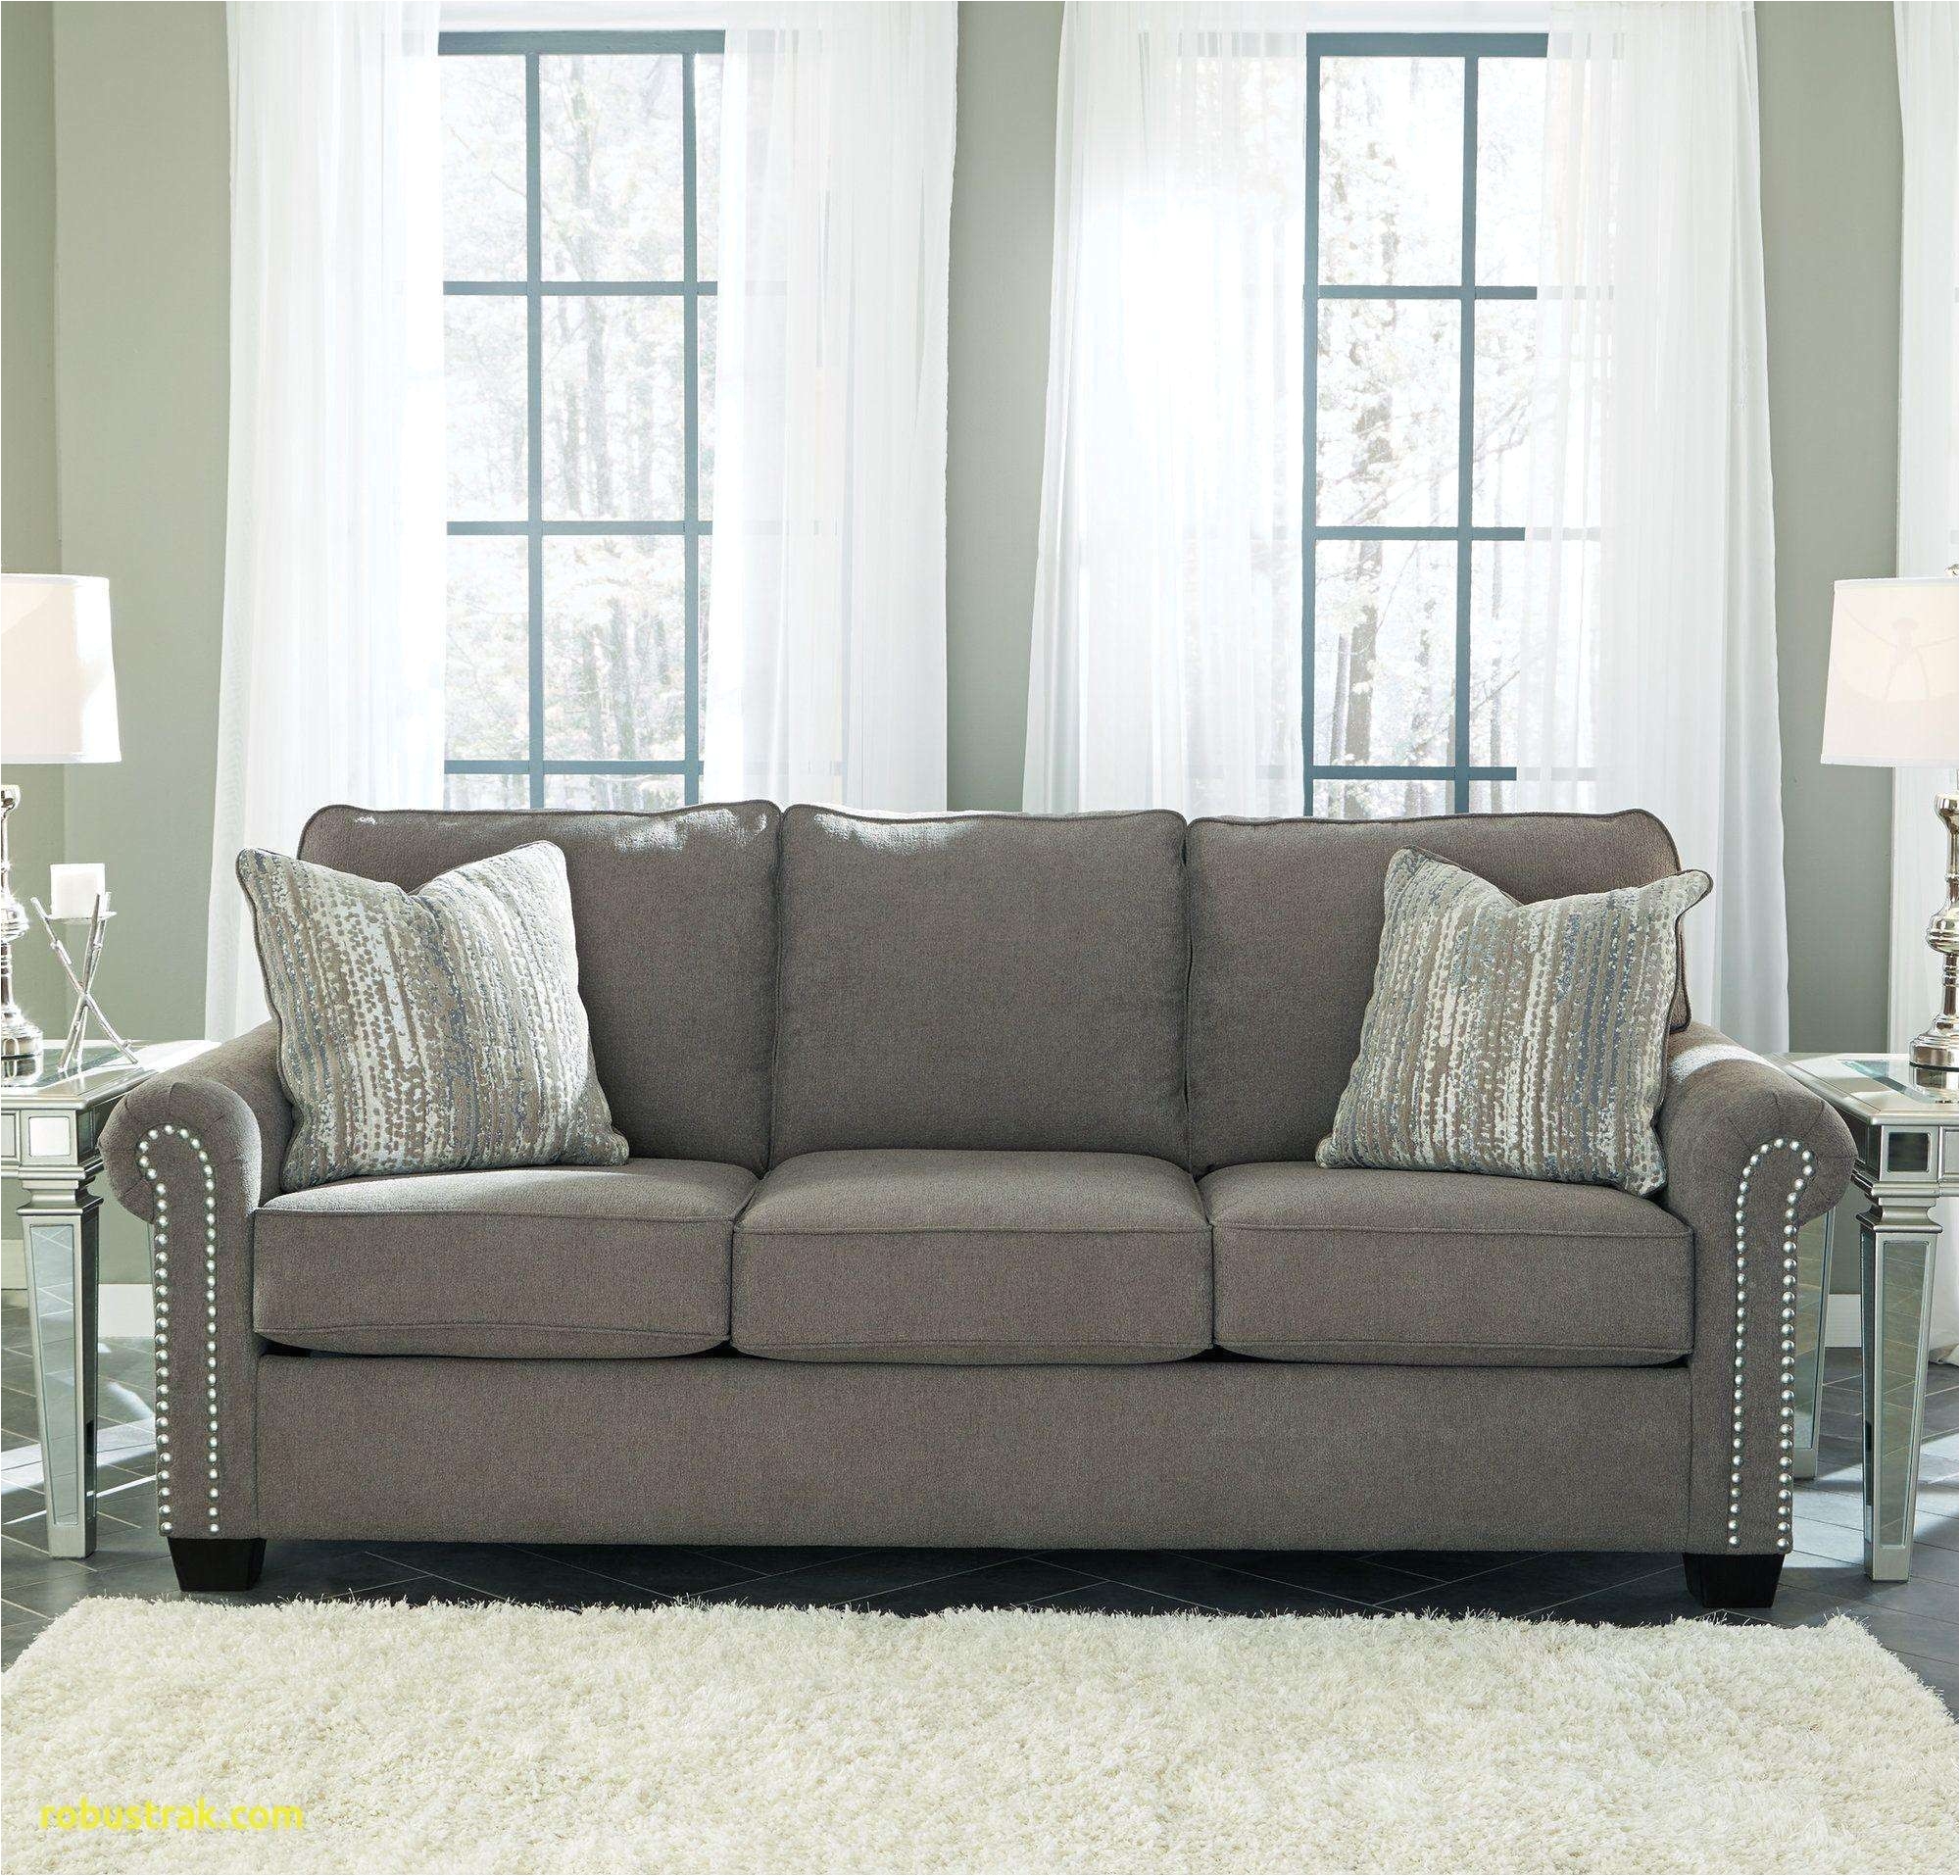 Brown Living Room Ideas Brown Couch Living Room Ideas Gorgeous L sofa Awesome Hay Couch 0d